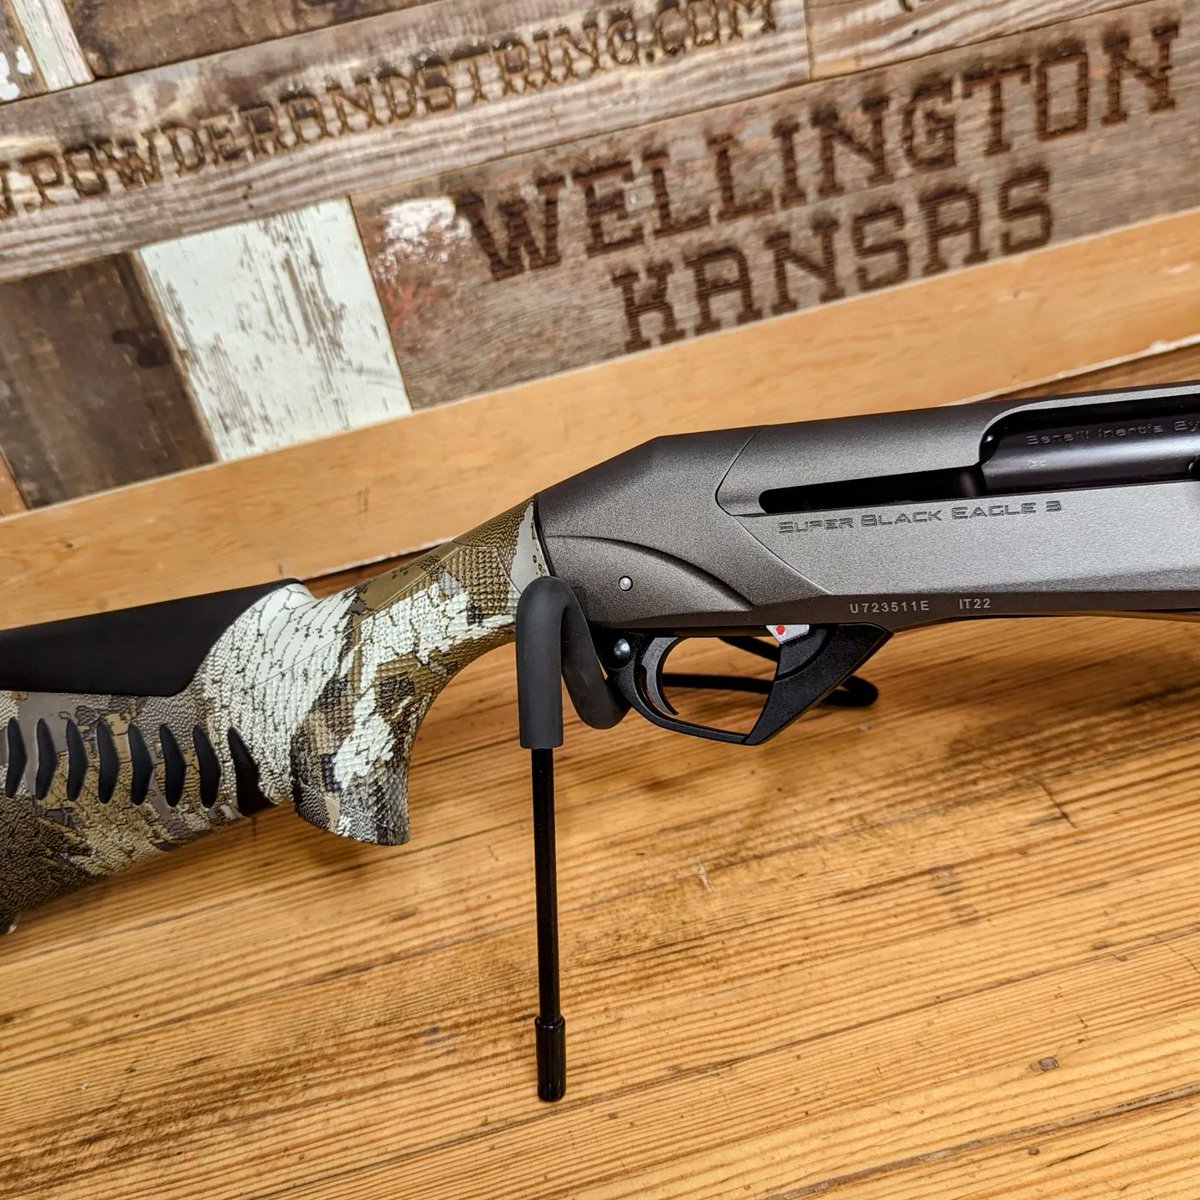 Be sure to stop by the shop this week to take advantage of our Kansas Wheat Festival deals on items like this @Benelli_USA SBE3!
#waterfowl 
#waterfowlhunting